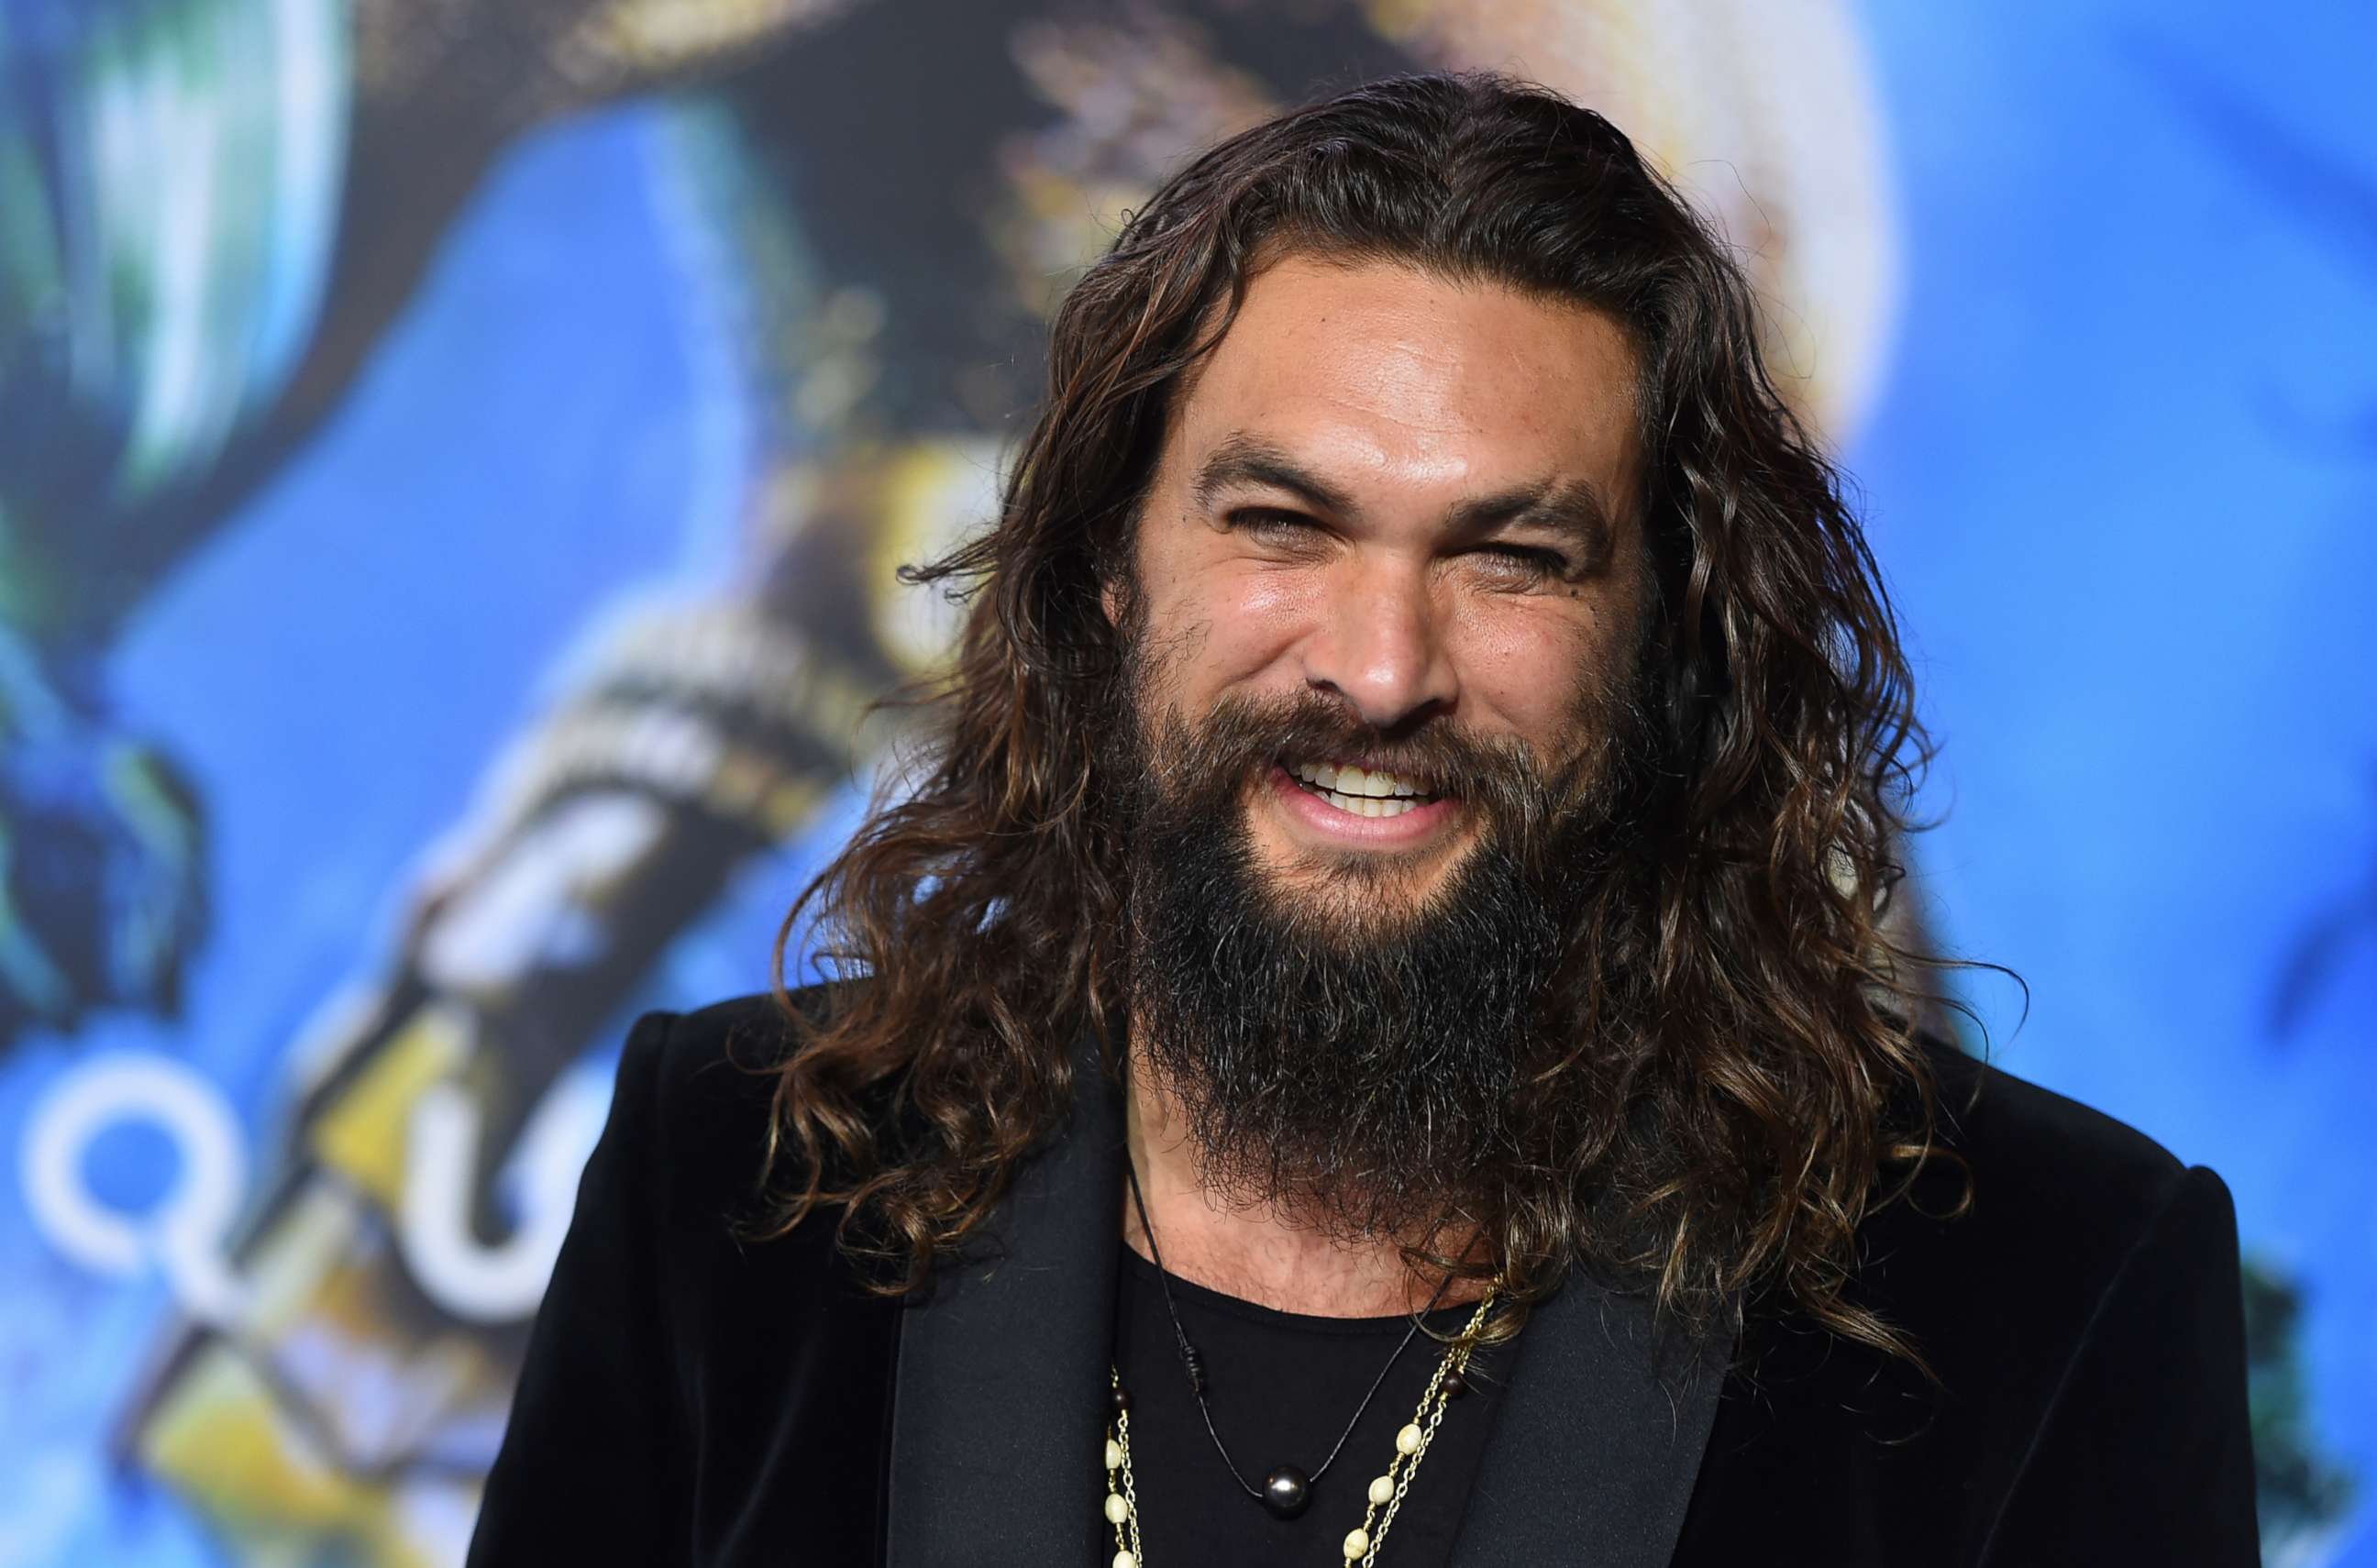 PHOTO: Jason Momoa arrives at the premiere of "Aquaman" at TCL Chinese Theatre in Los Angeles, Dec. 12, 2018.